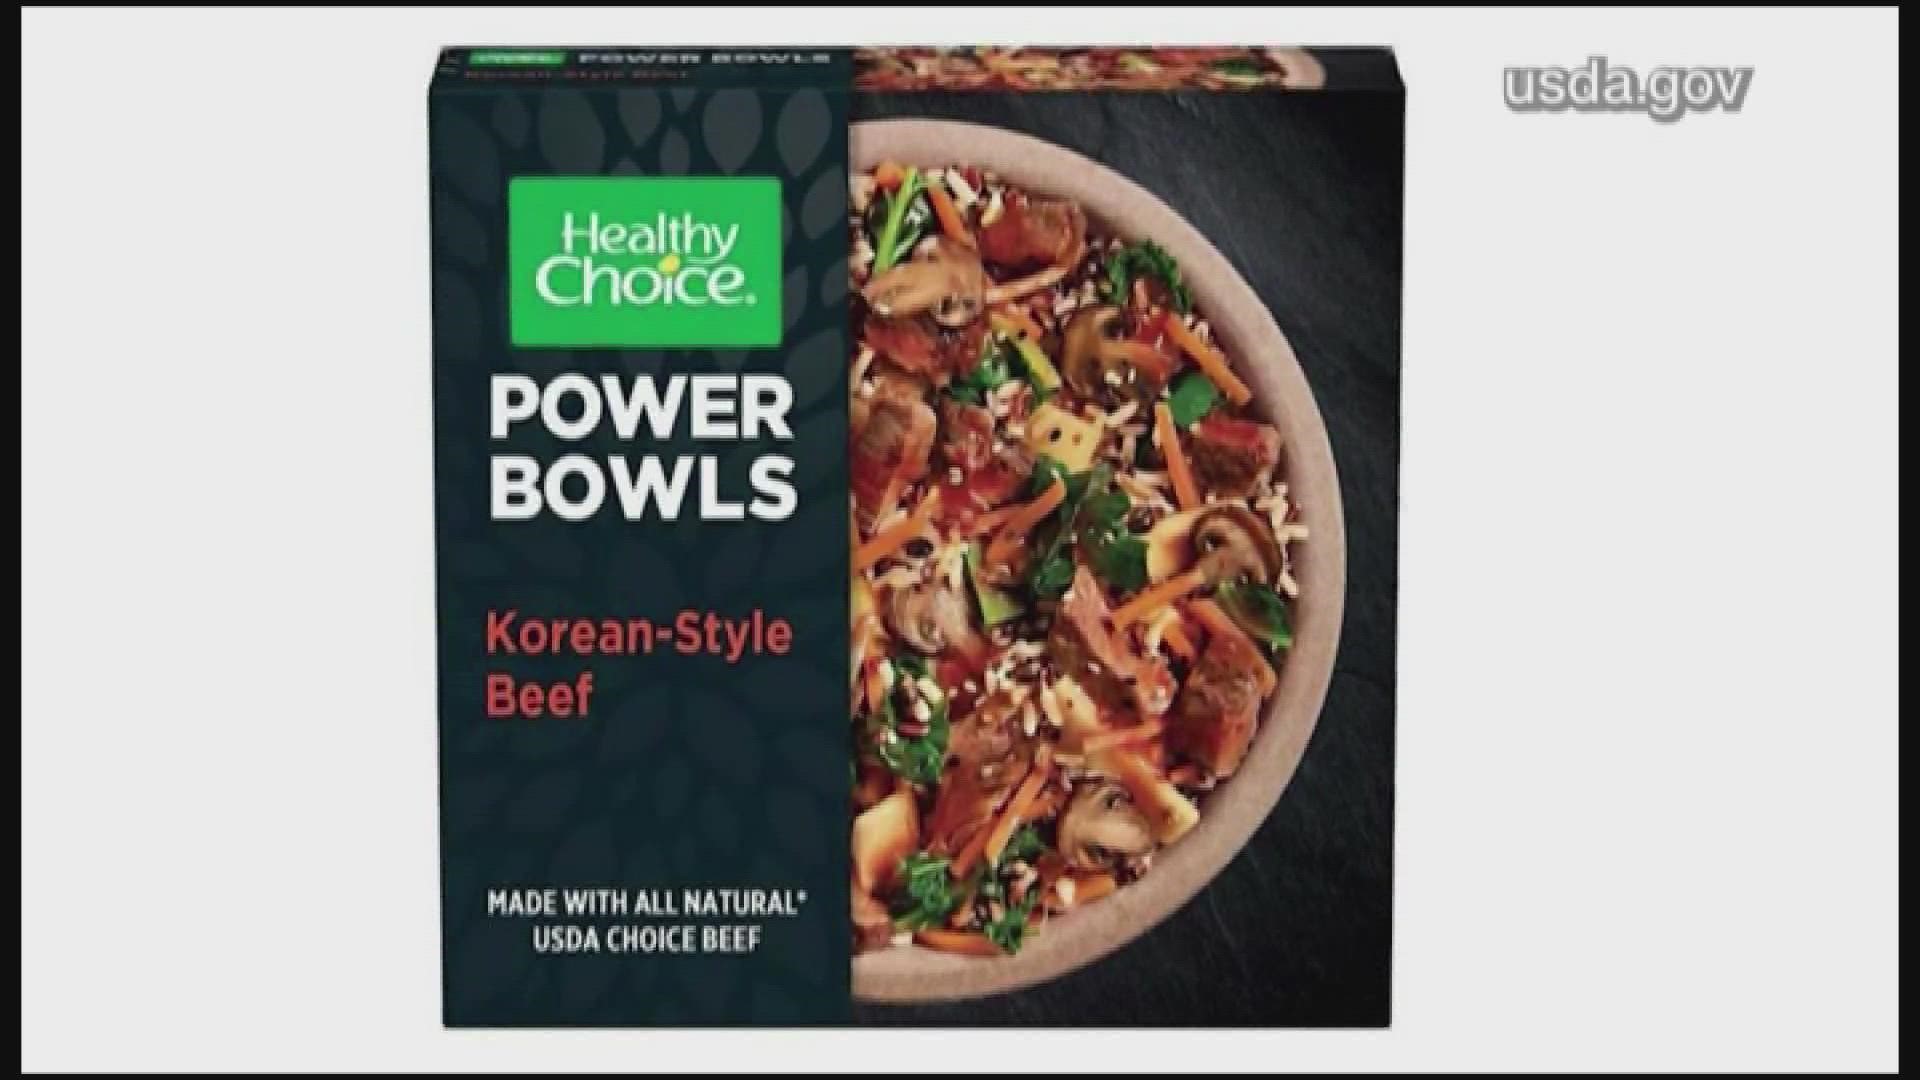 The Korean-Style Beef, part of Healthy Choice's line of power bowls doesn't have a proper label, warning that the meal contains milk.